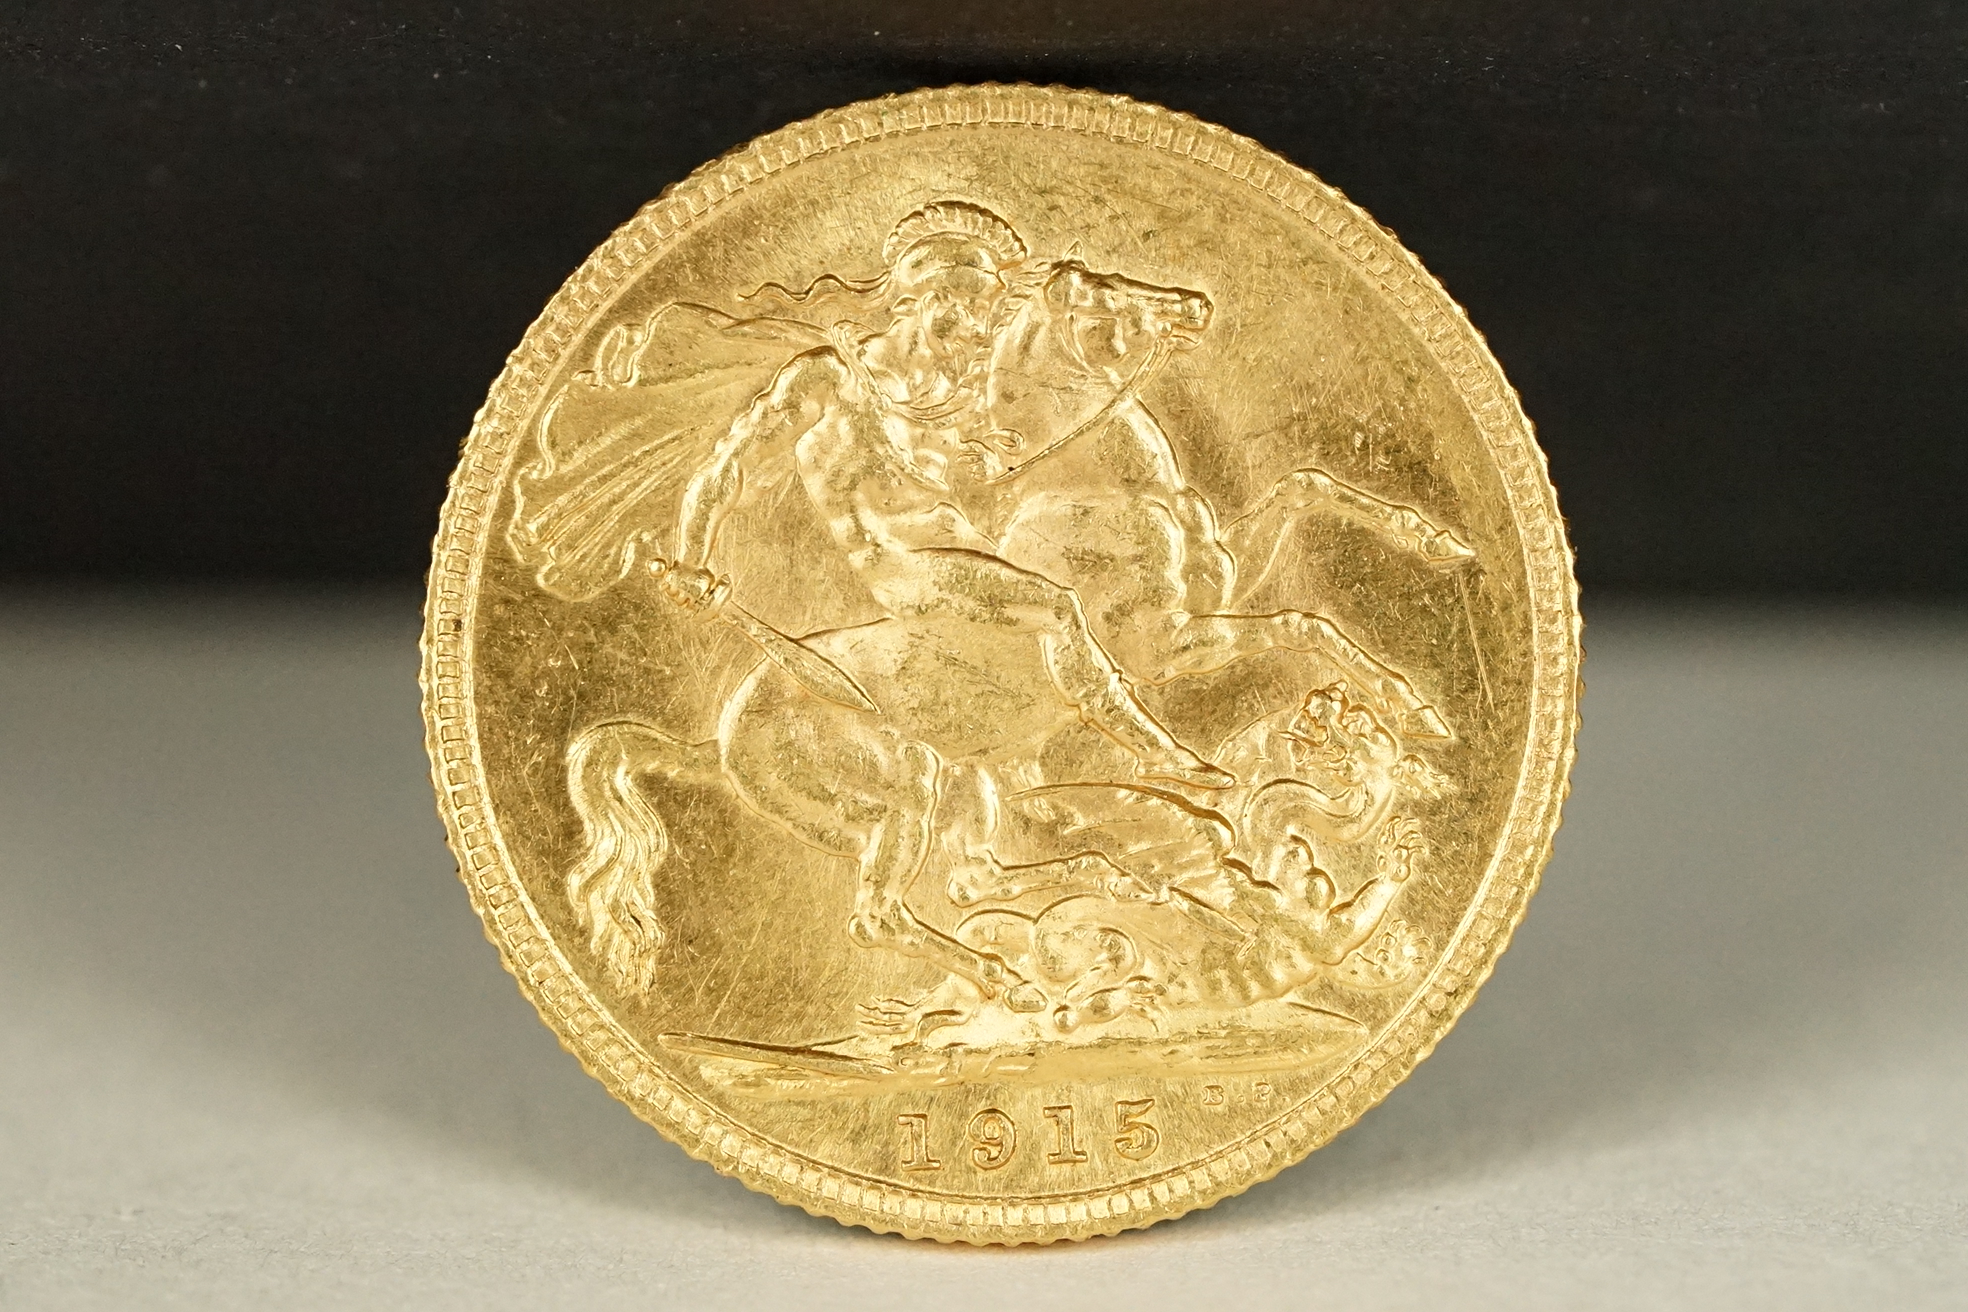 A British King George V 1915 gold full sovereign coin.